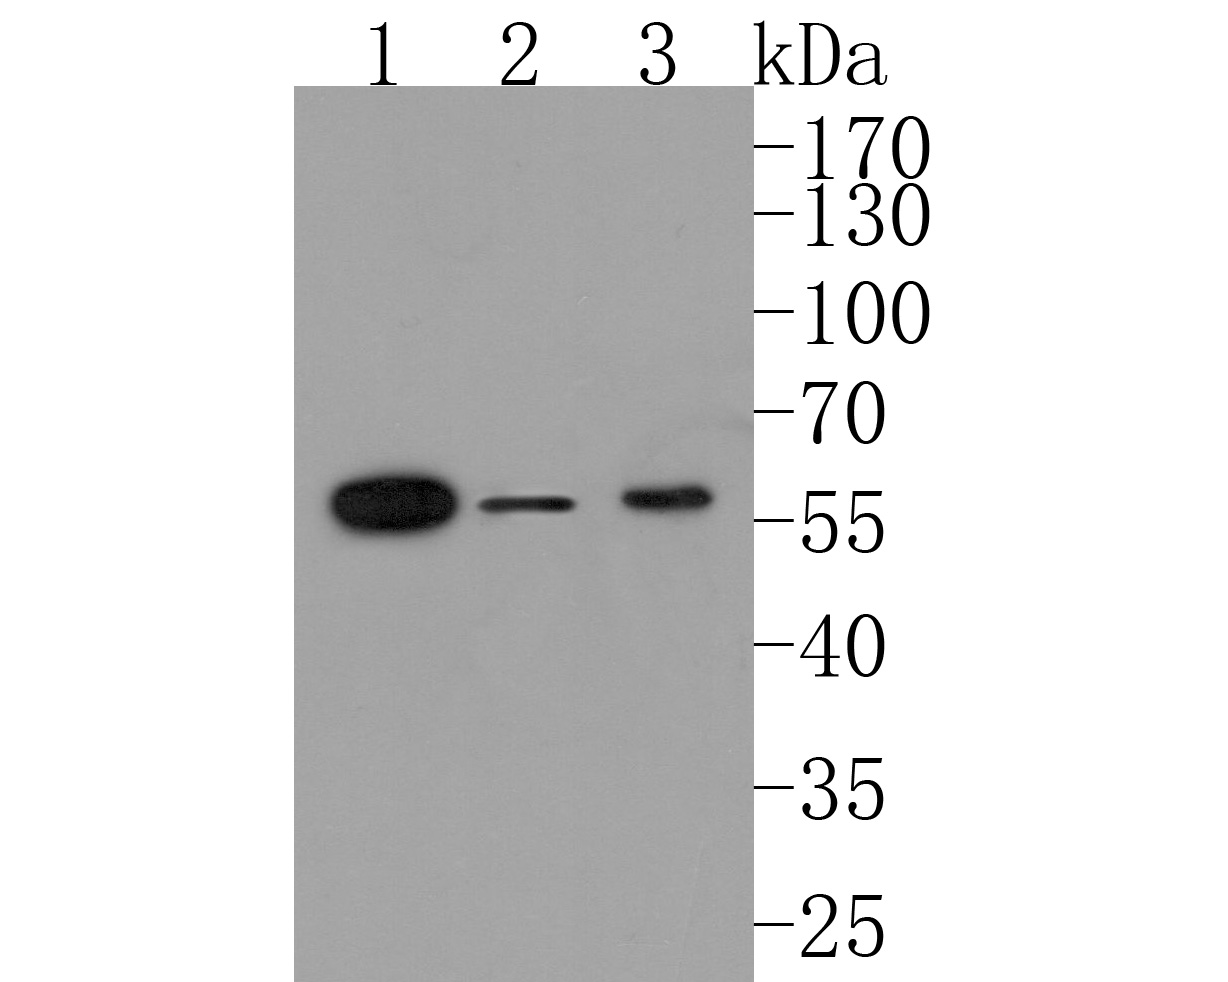 Western blot analysis of Activin Receptor Type IA on different lysates. Proteins were transferred to a PVDF membrane and blocked with 5% BSA in PBS for 1 hour at room temperature. The primary antibody (HA500117, 1/500) was used in 5% BSA at room temperature for 2 hours. Goat Anti-Rabbit IgG - HRP Secondary Antibody (HA1001) at 1:200,000 dilution was used for 1 hour at room temperature.<br />
Positive control: <br />
Lane 1: Mouse skeletal muscle tissue lysate<br />
Lane 2: PC-3 cell lysate<br />
Lane 3: Rat skeletal muscle tissue lysate